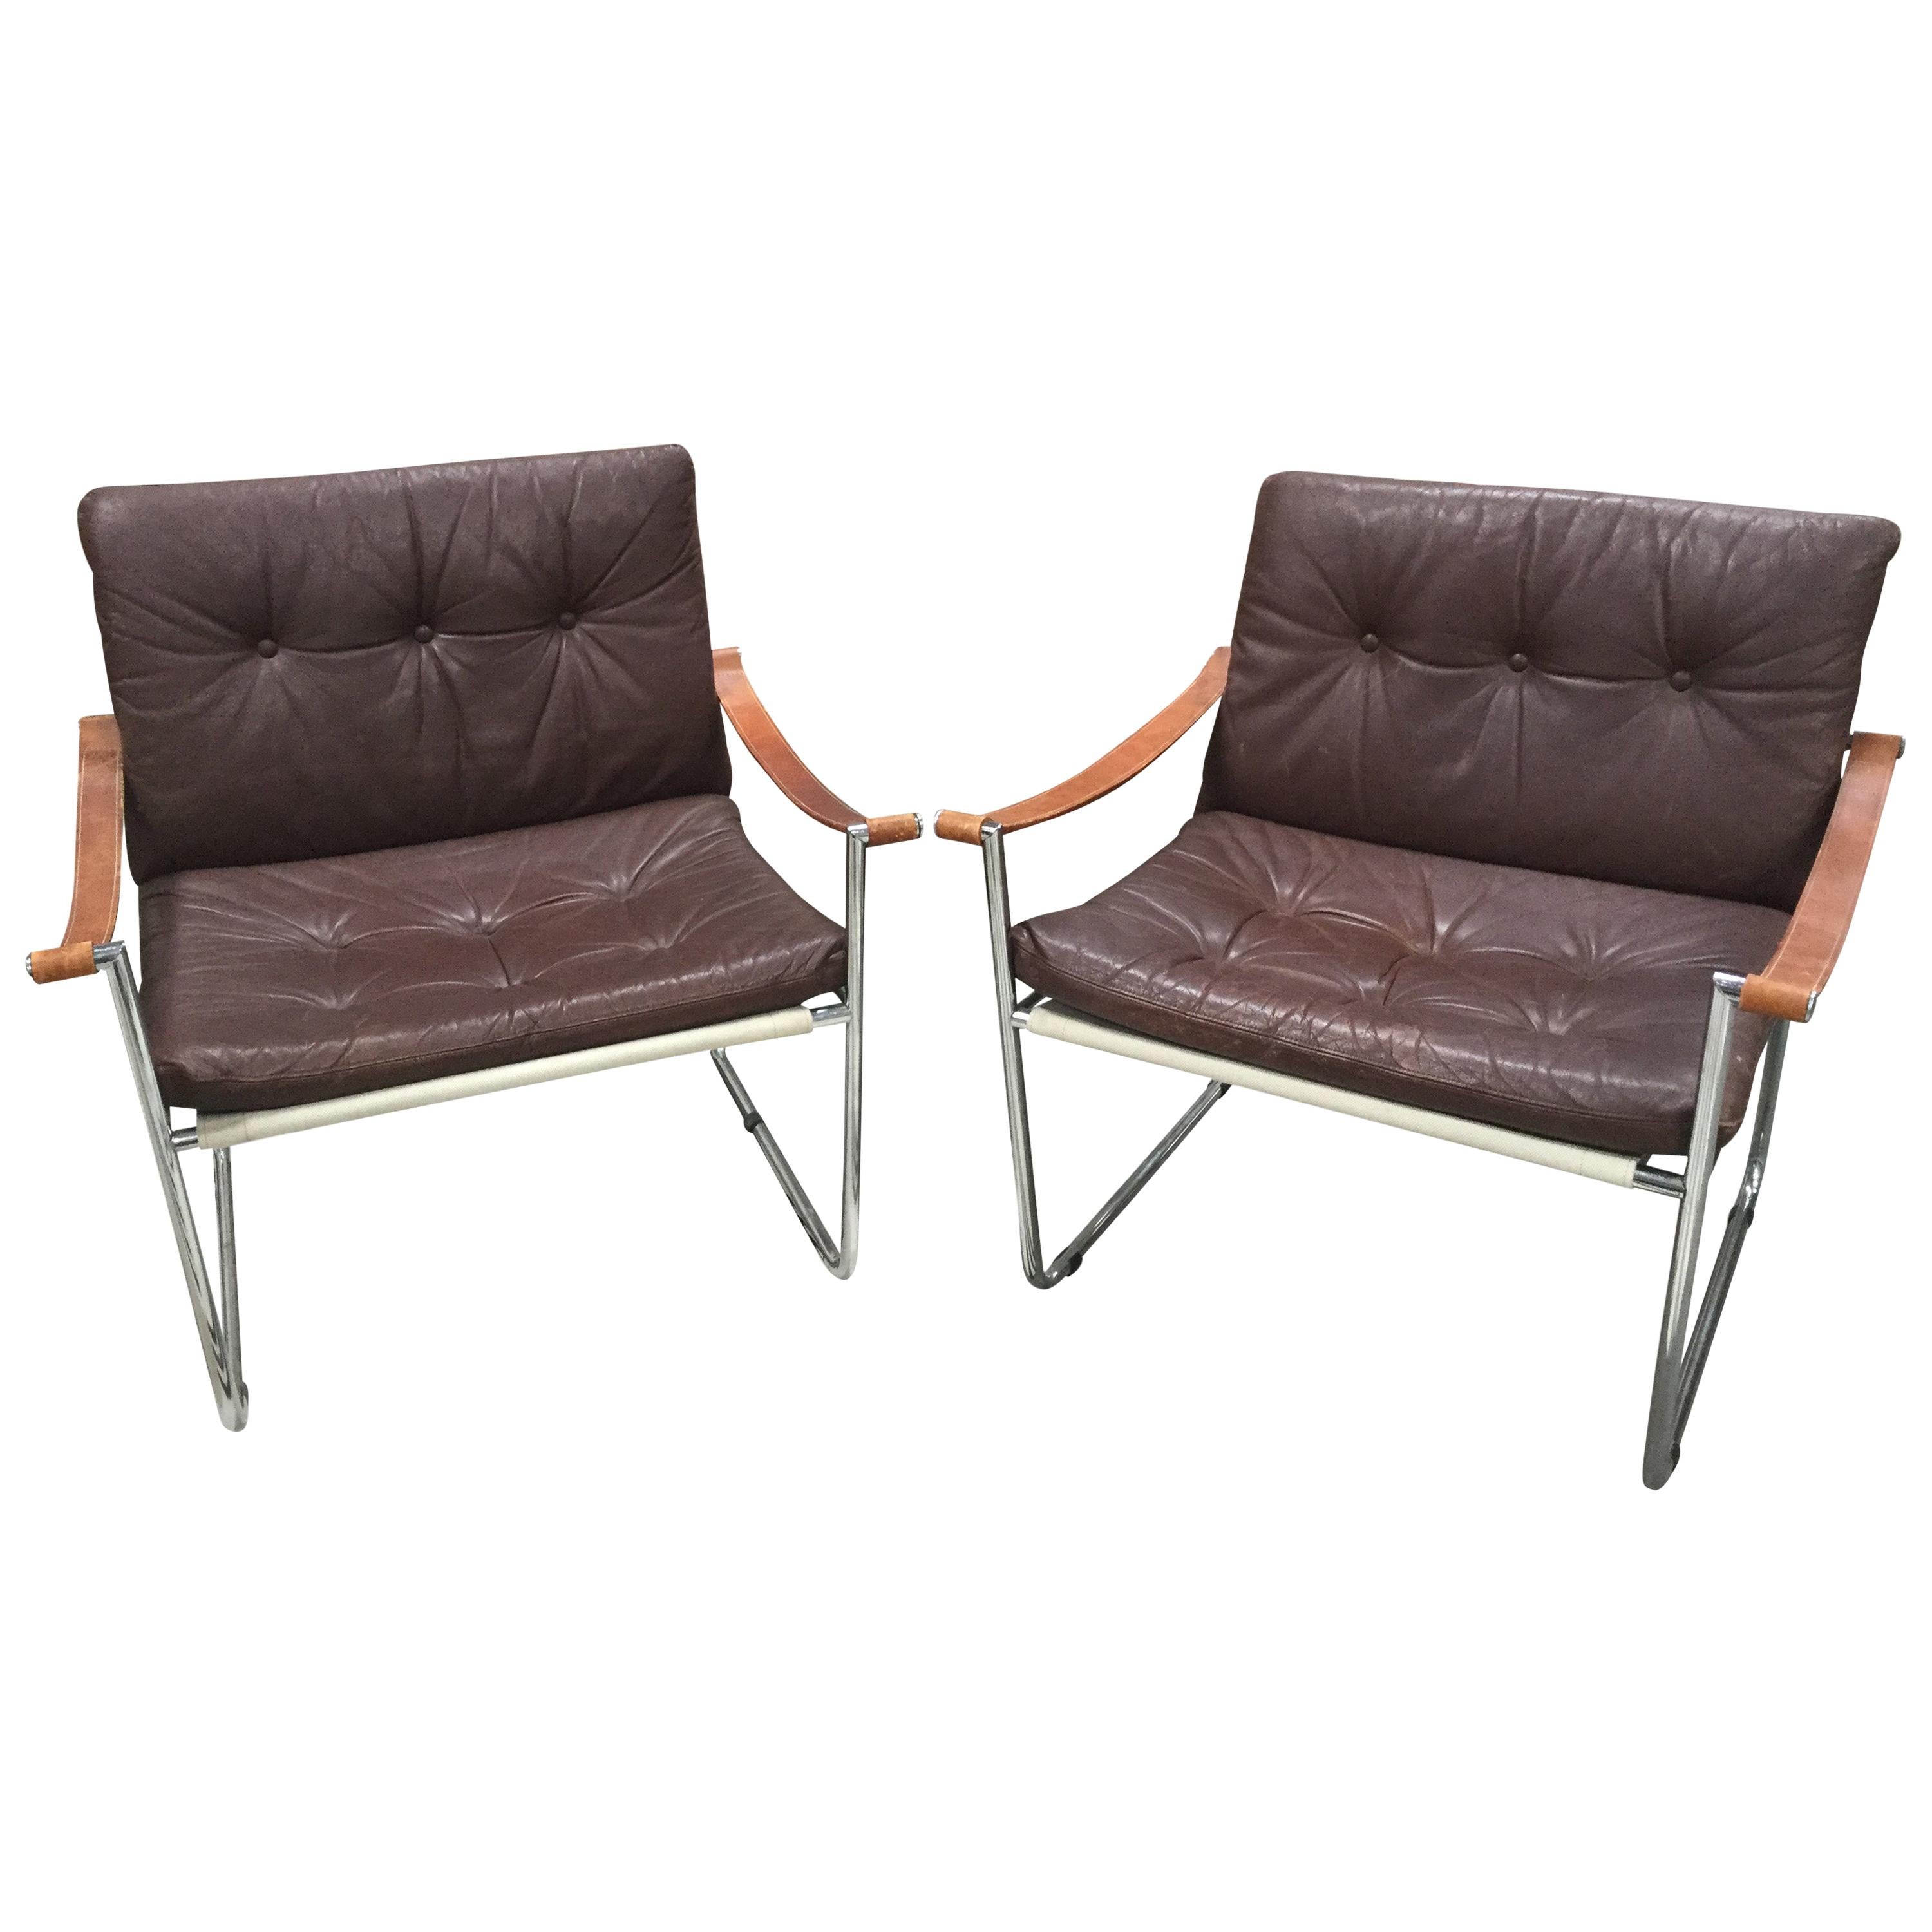 Pair of Vintage Midcentury Danish Leather and Metal Armchairs